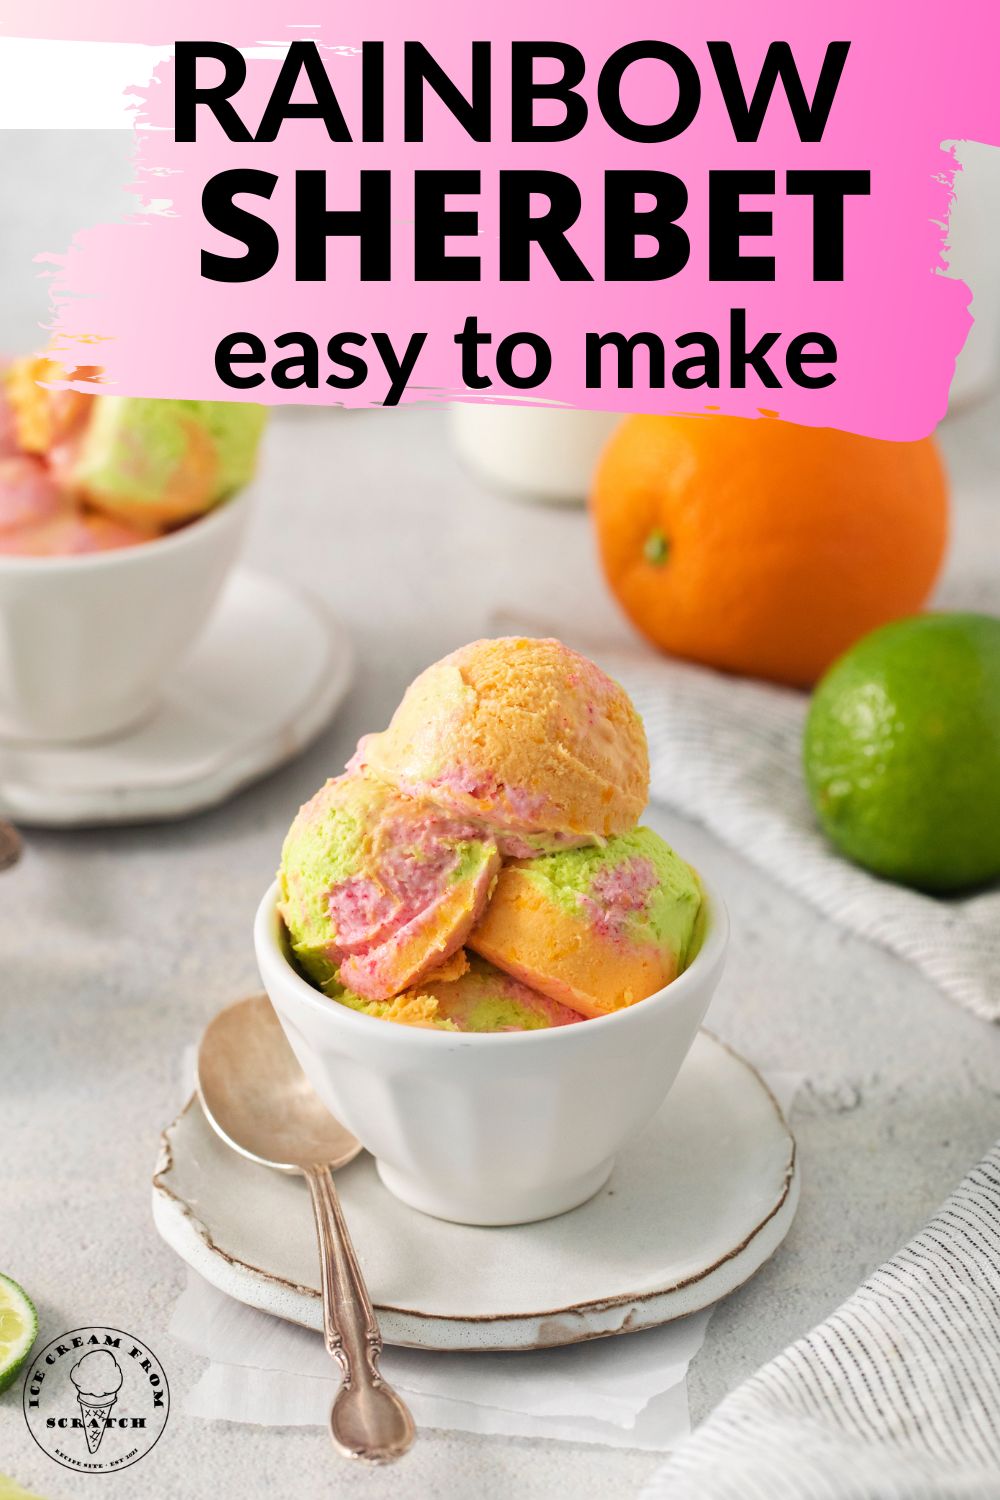 a white ceramic bowl filled with scoops of rainbow sherbet. Text overlay at top of image in black letters over pink says "rainbow sherbet easy to make"